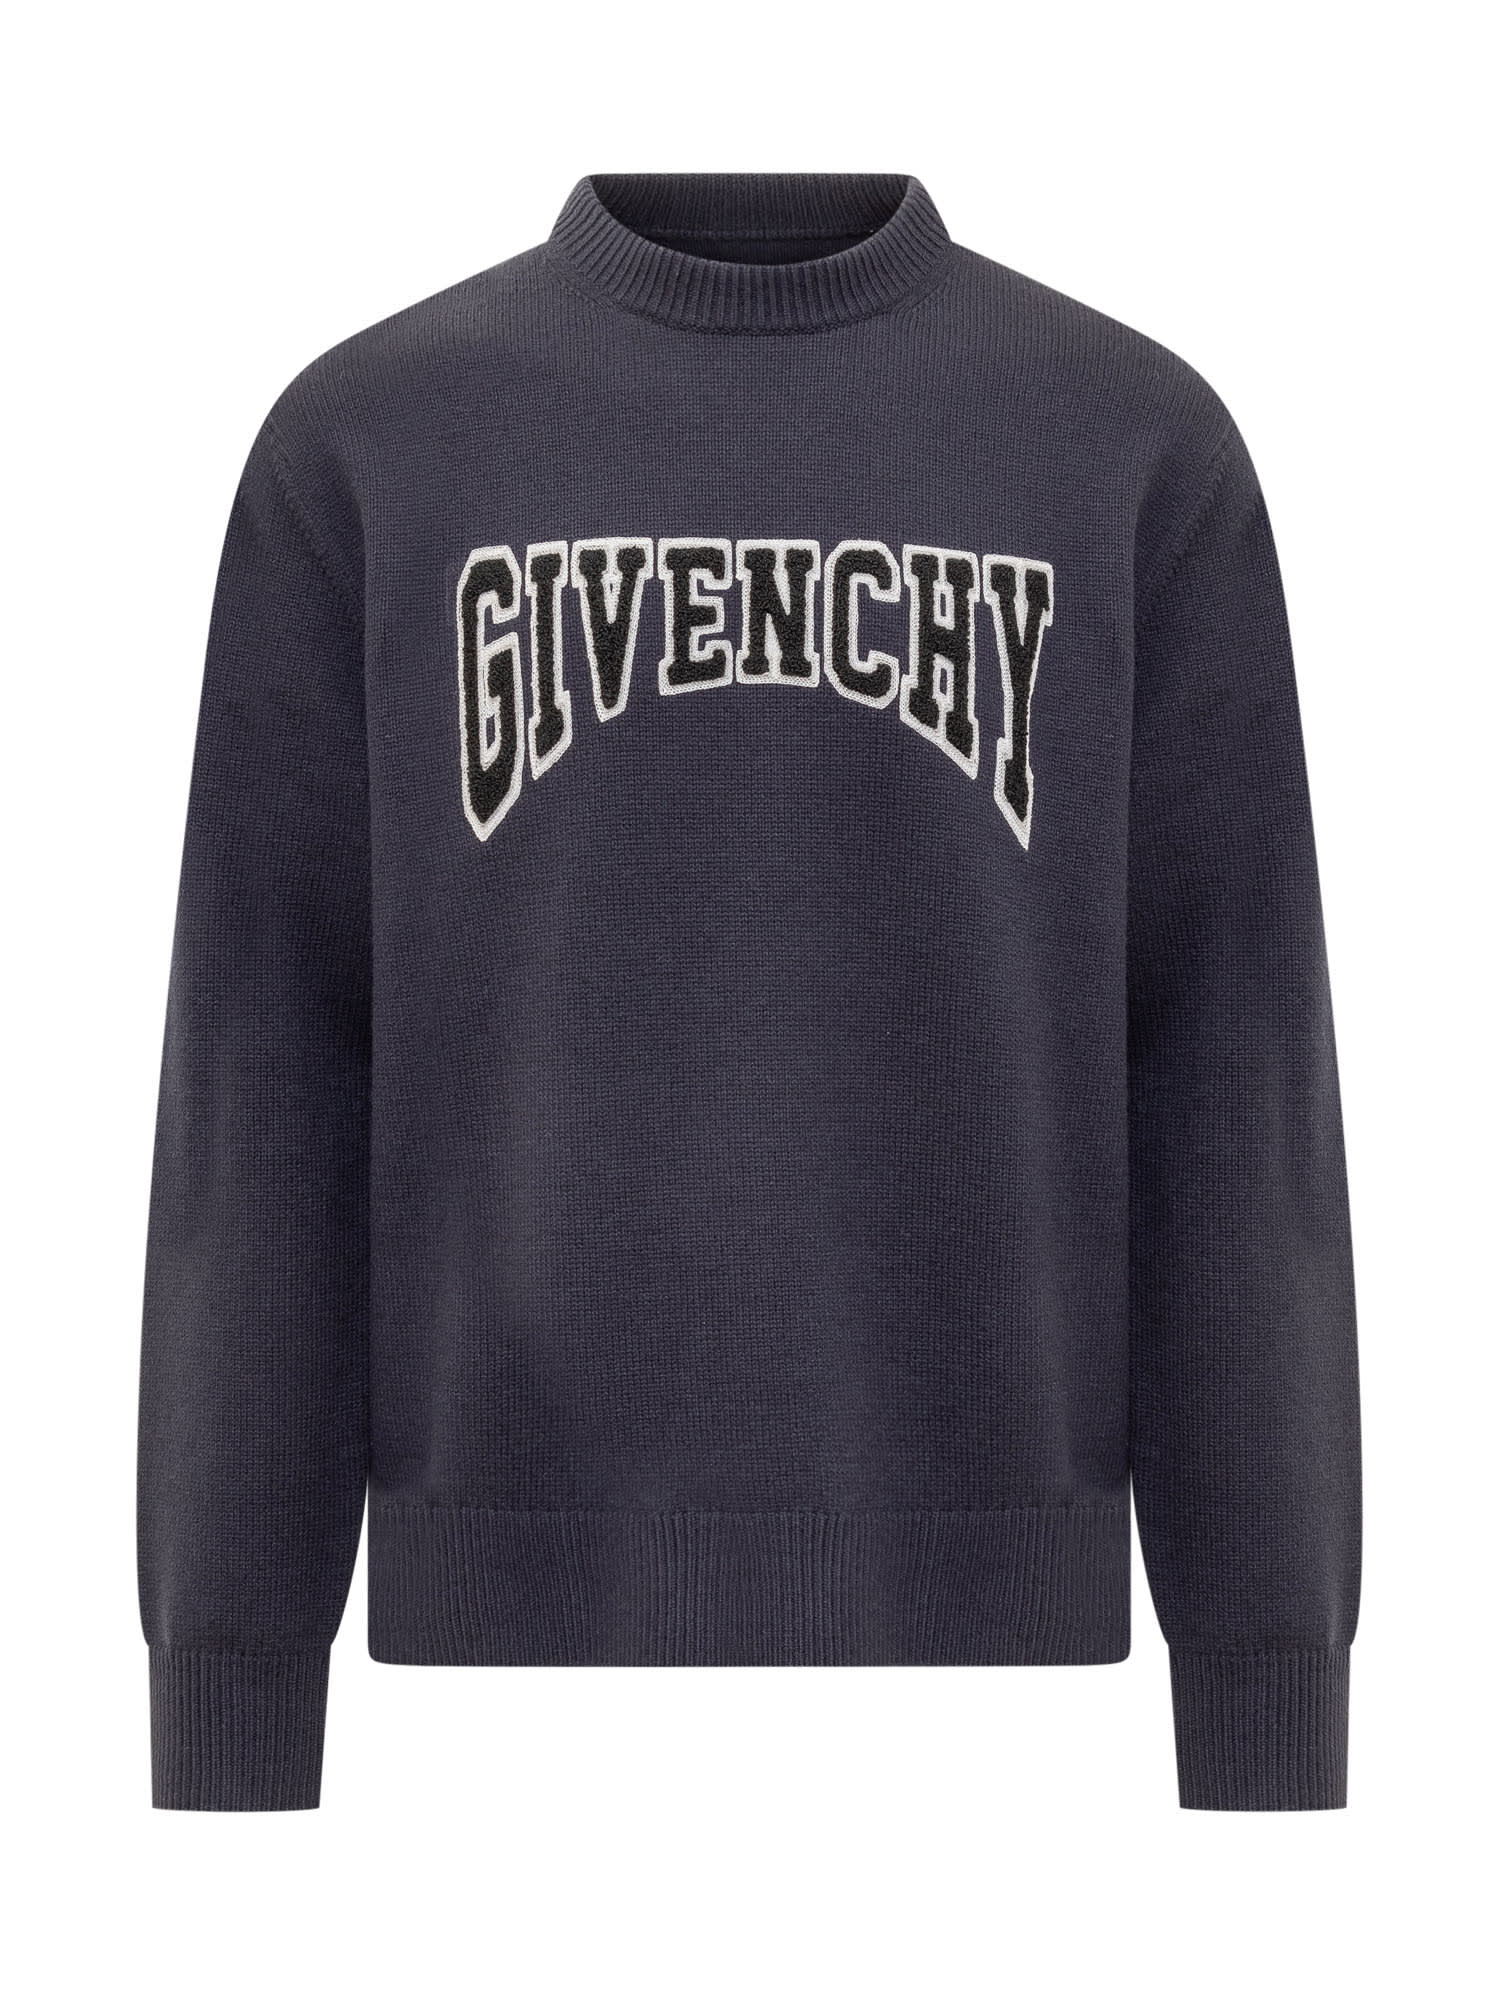 GIVENCHY COLLEGE EMBROIDERY CREWNECK SWEATER